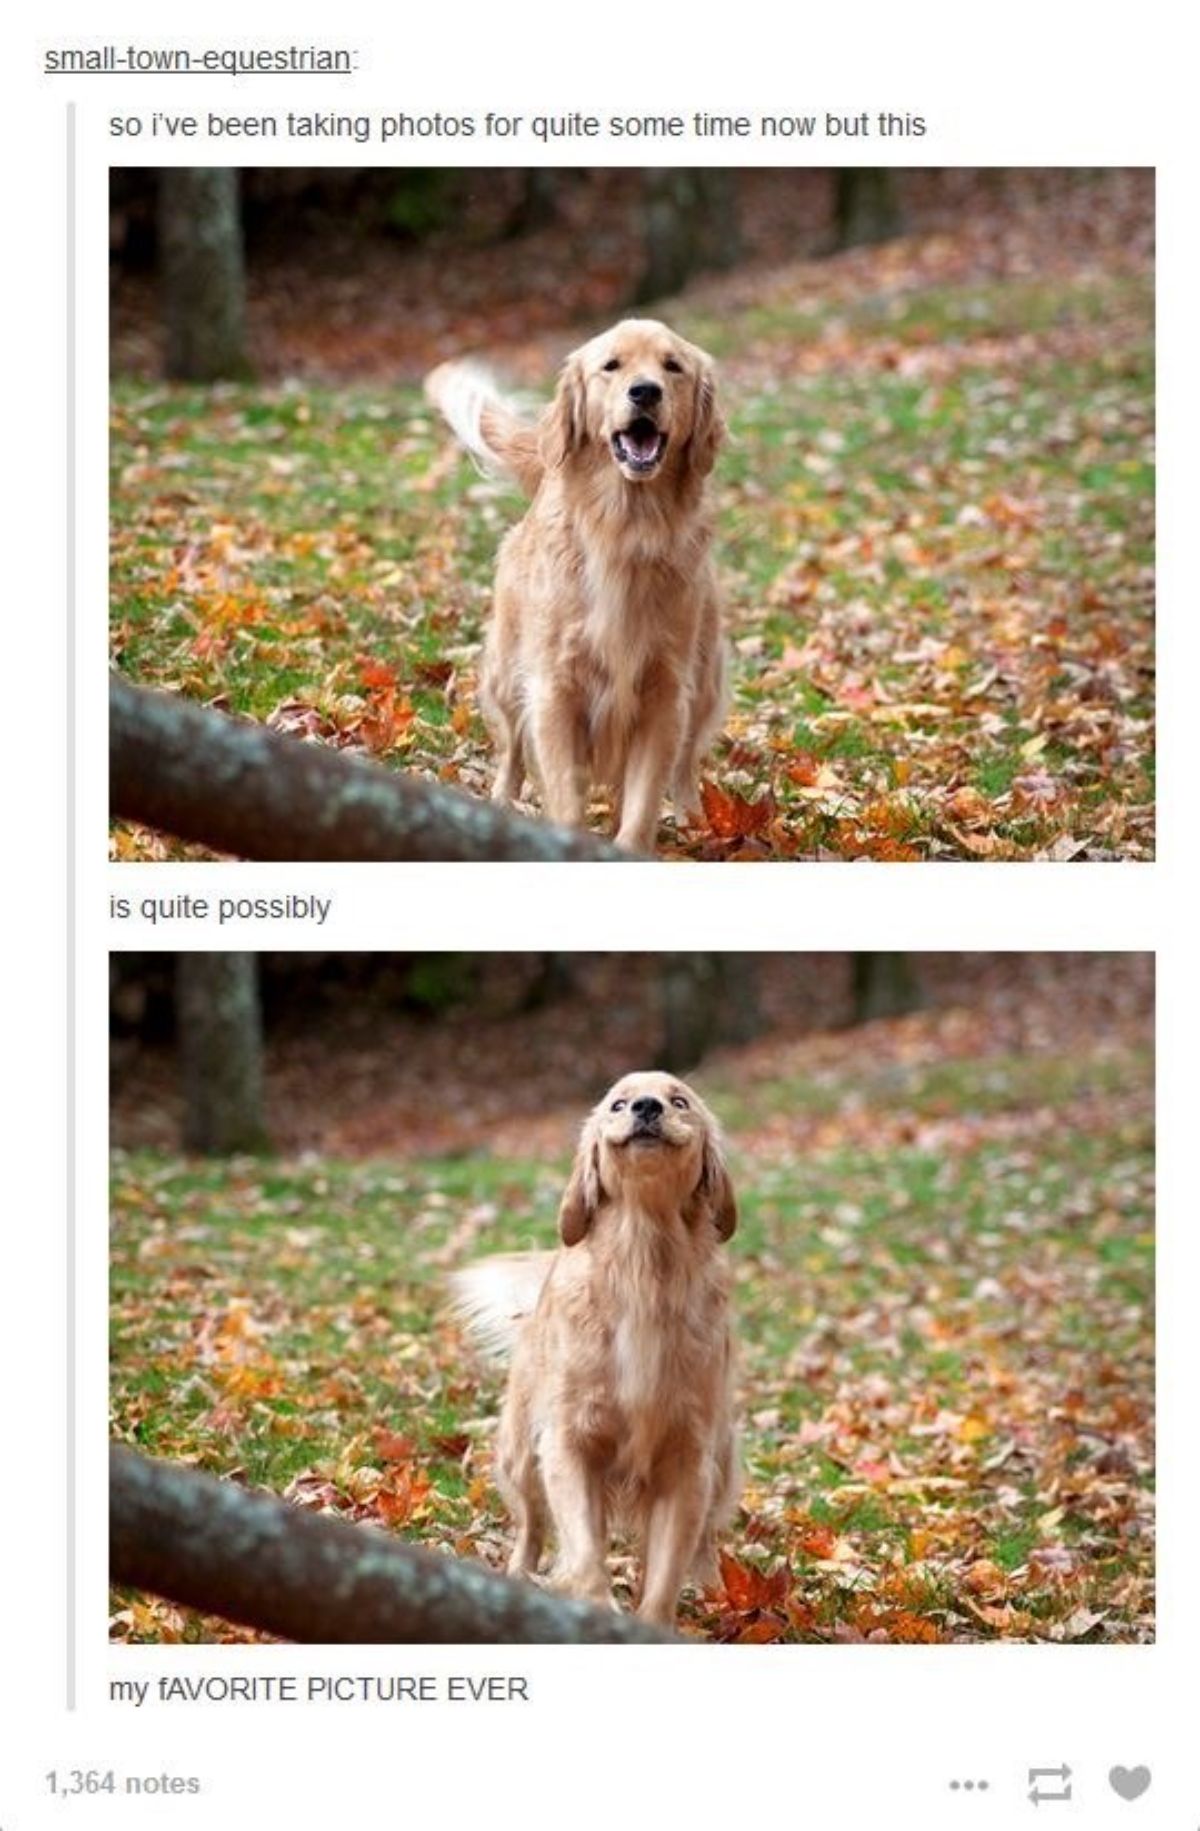 2 photos of a golden retriever running with the seond photo looking like the dog is smiling